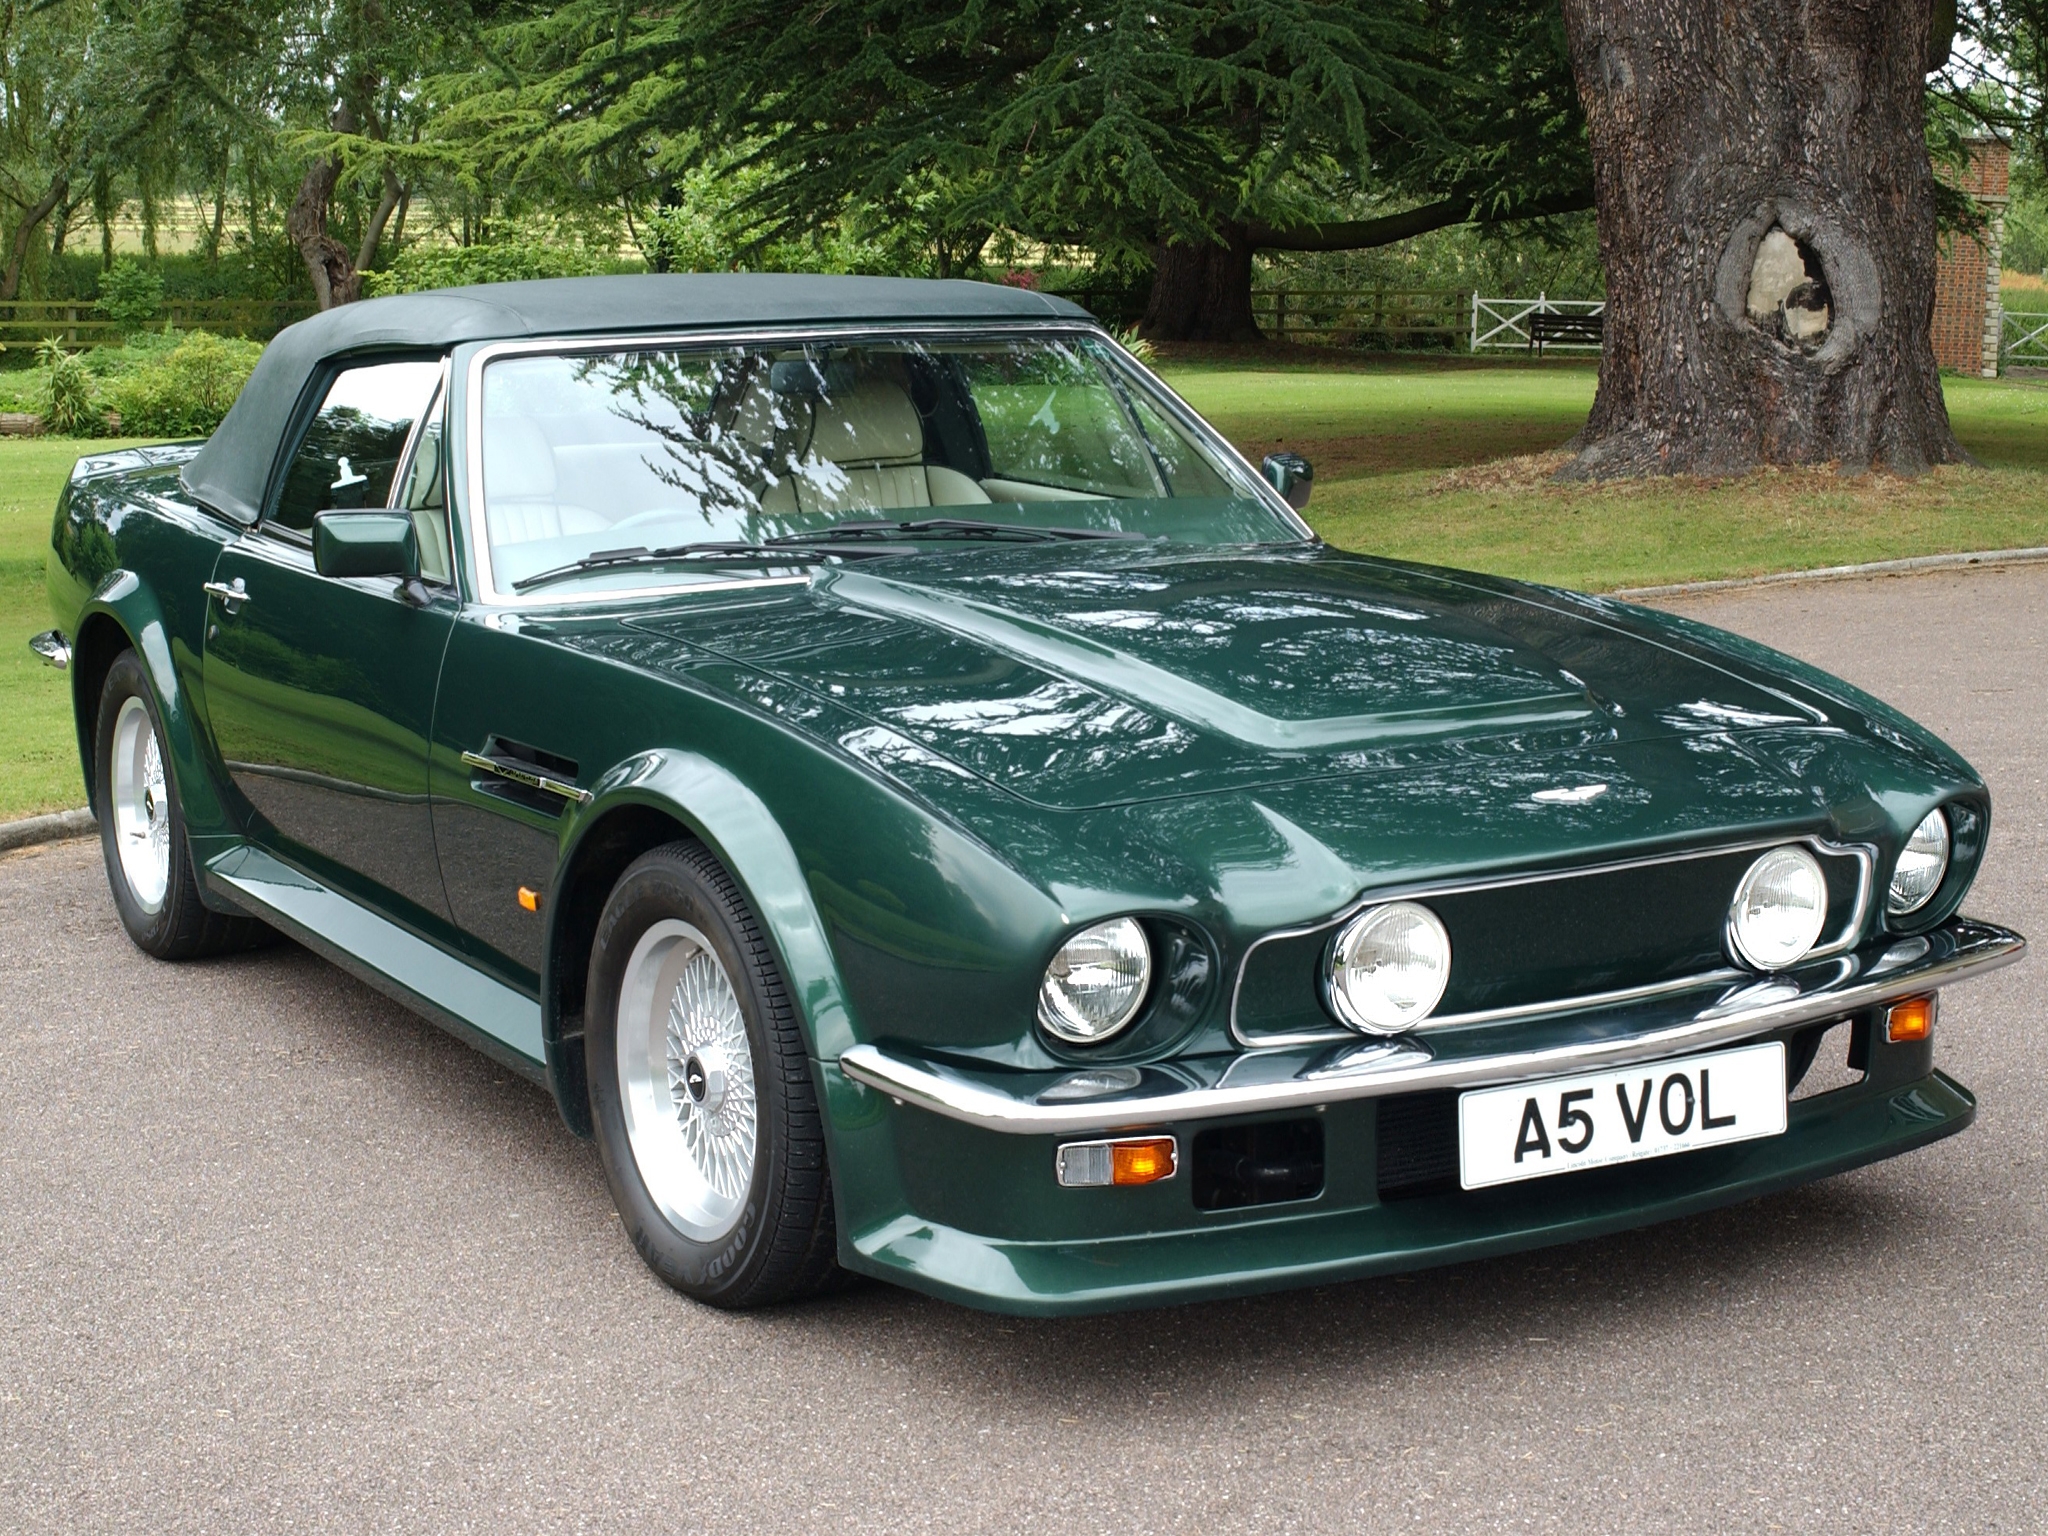 New Lock Screen Wallpapers front view, auto, aston martin, cars, green, v8, vantage, 1984